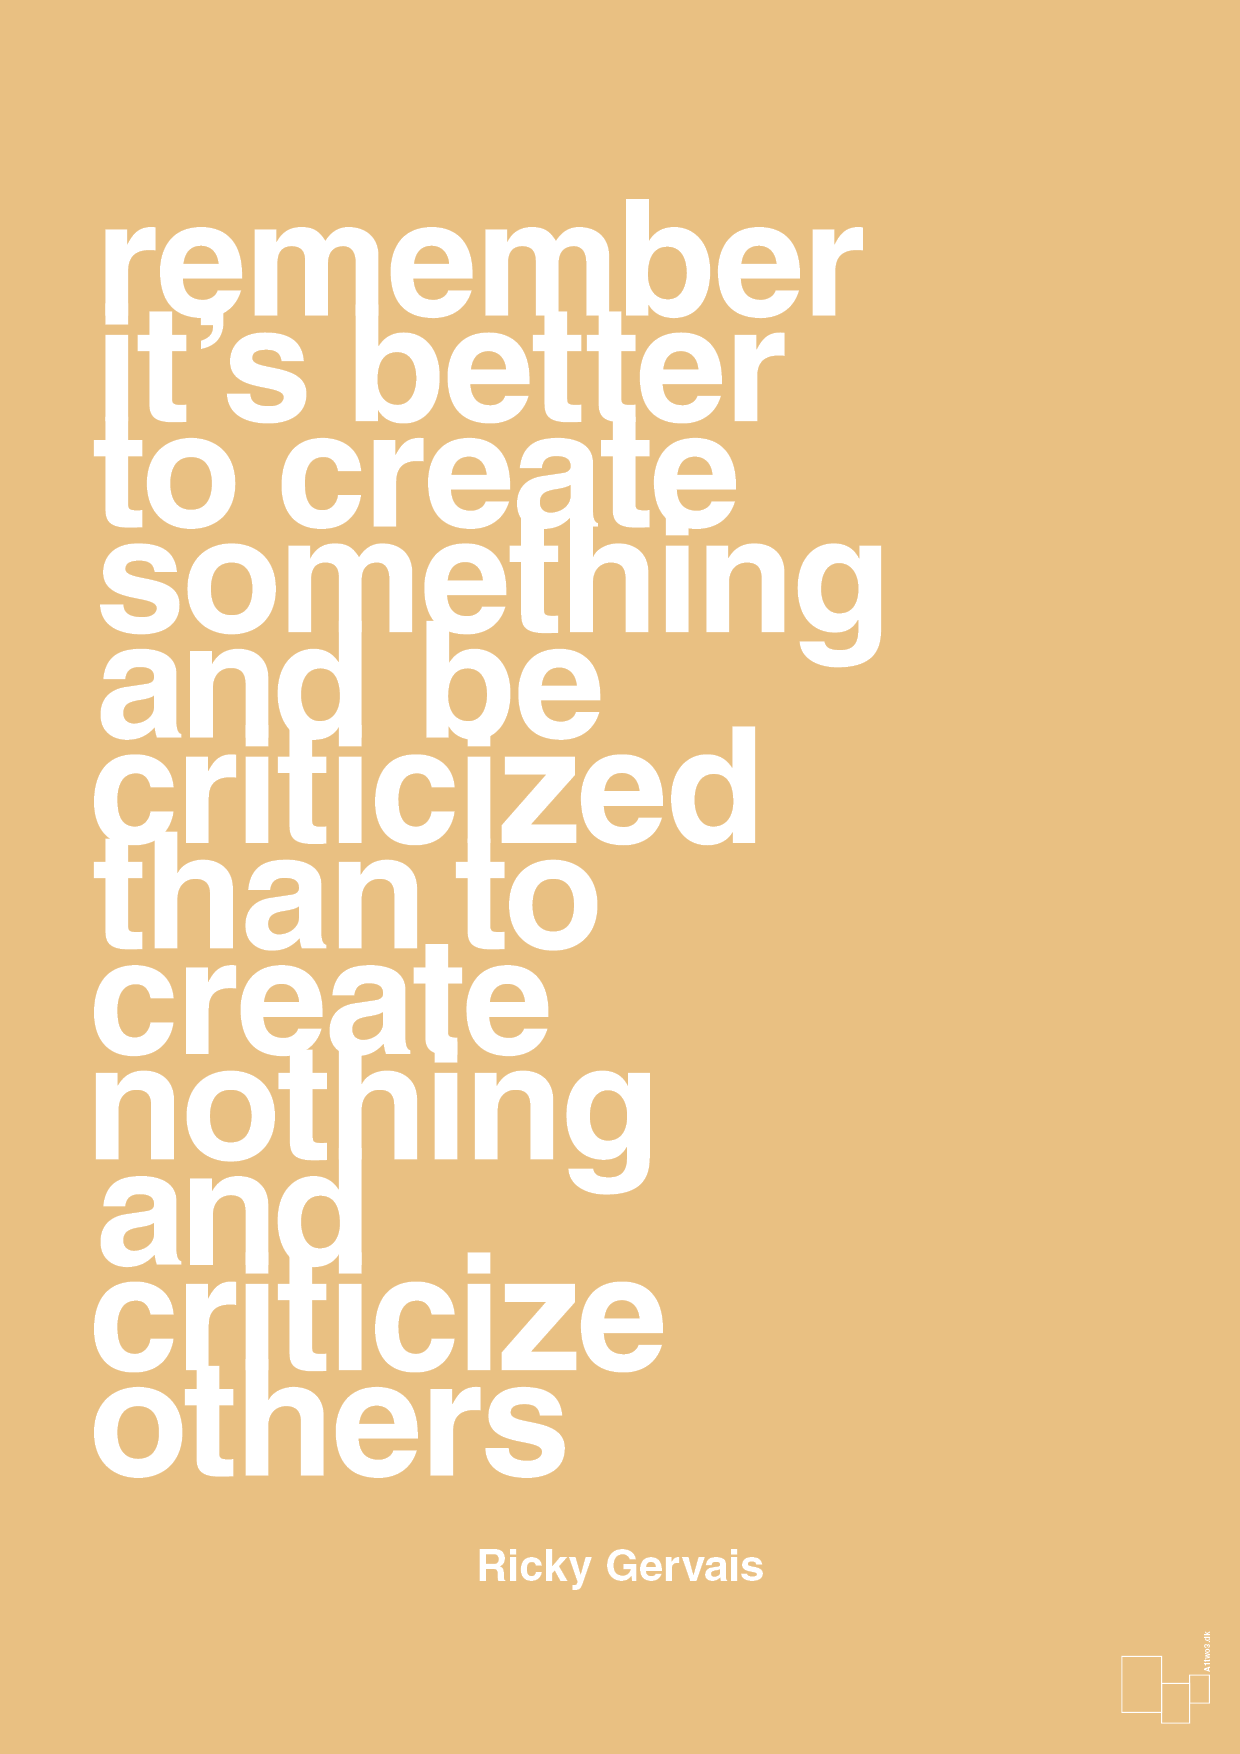 remember its better to create something and be criticized than create nothing and criticize others - Plakat med Citater i Charismatic